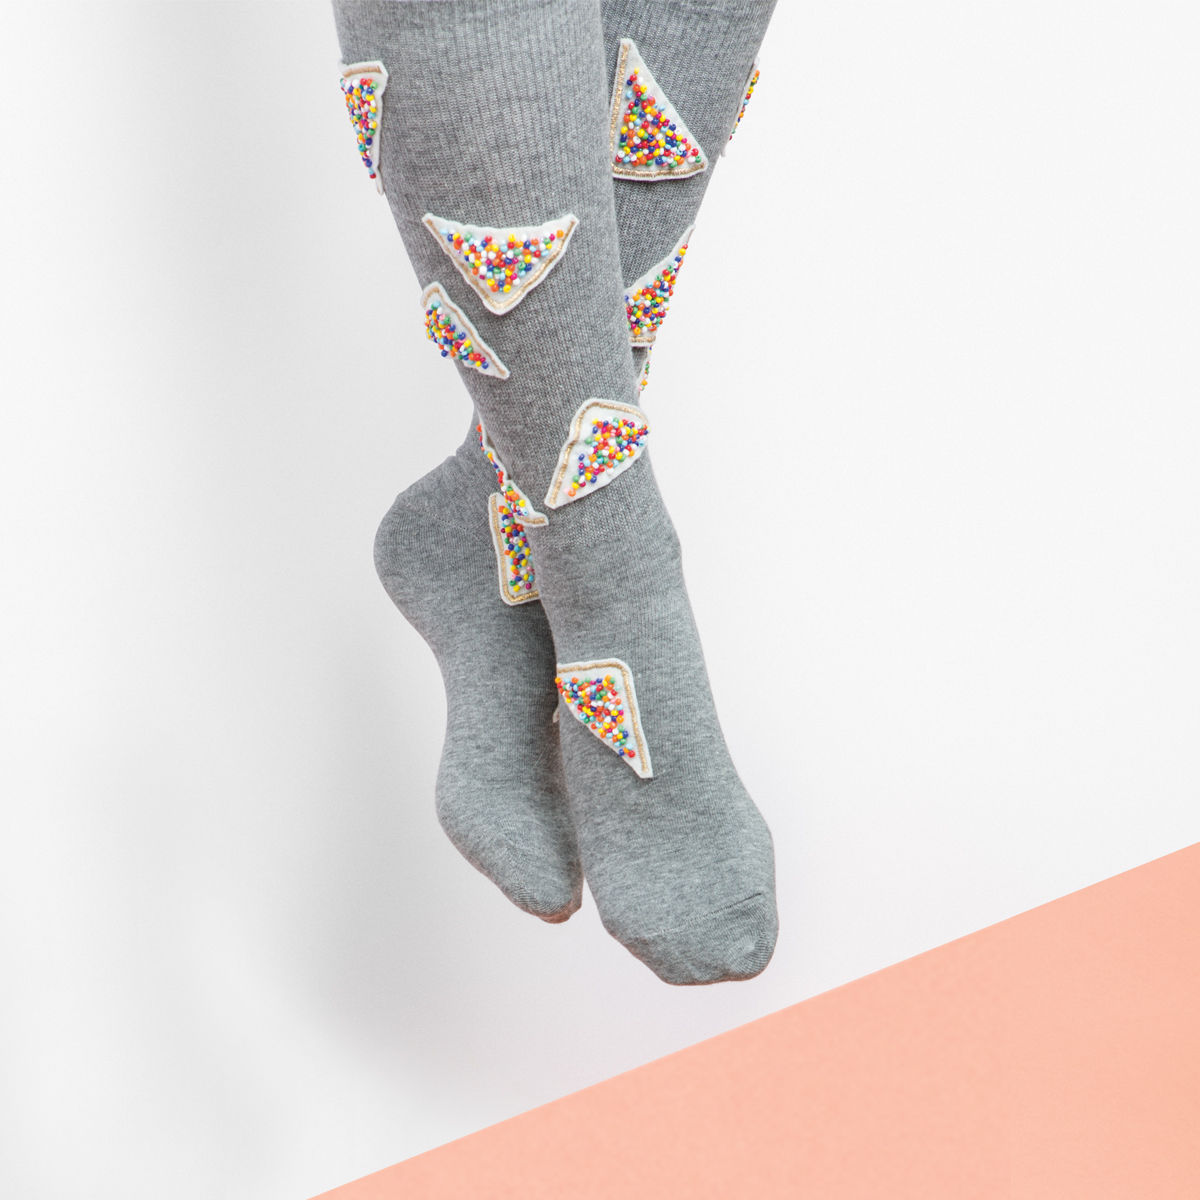 FrankieMag must-have socks triangles http://weirdatheart.com/absolutely-must-have-socks/